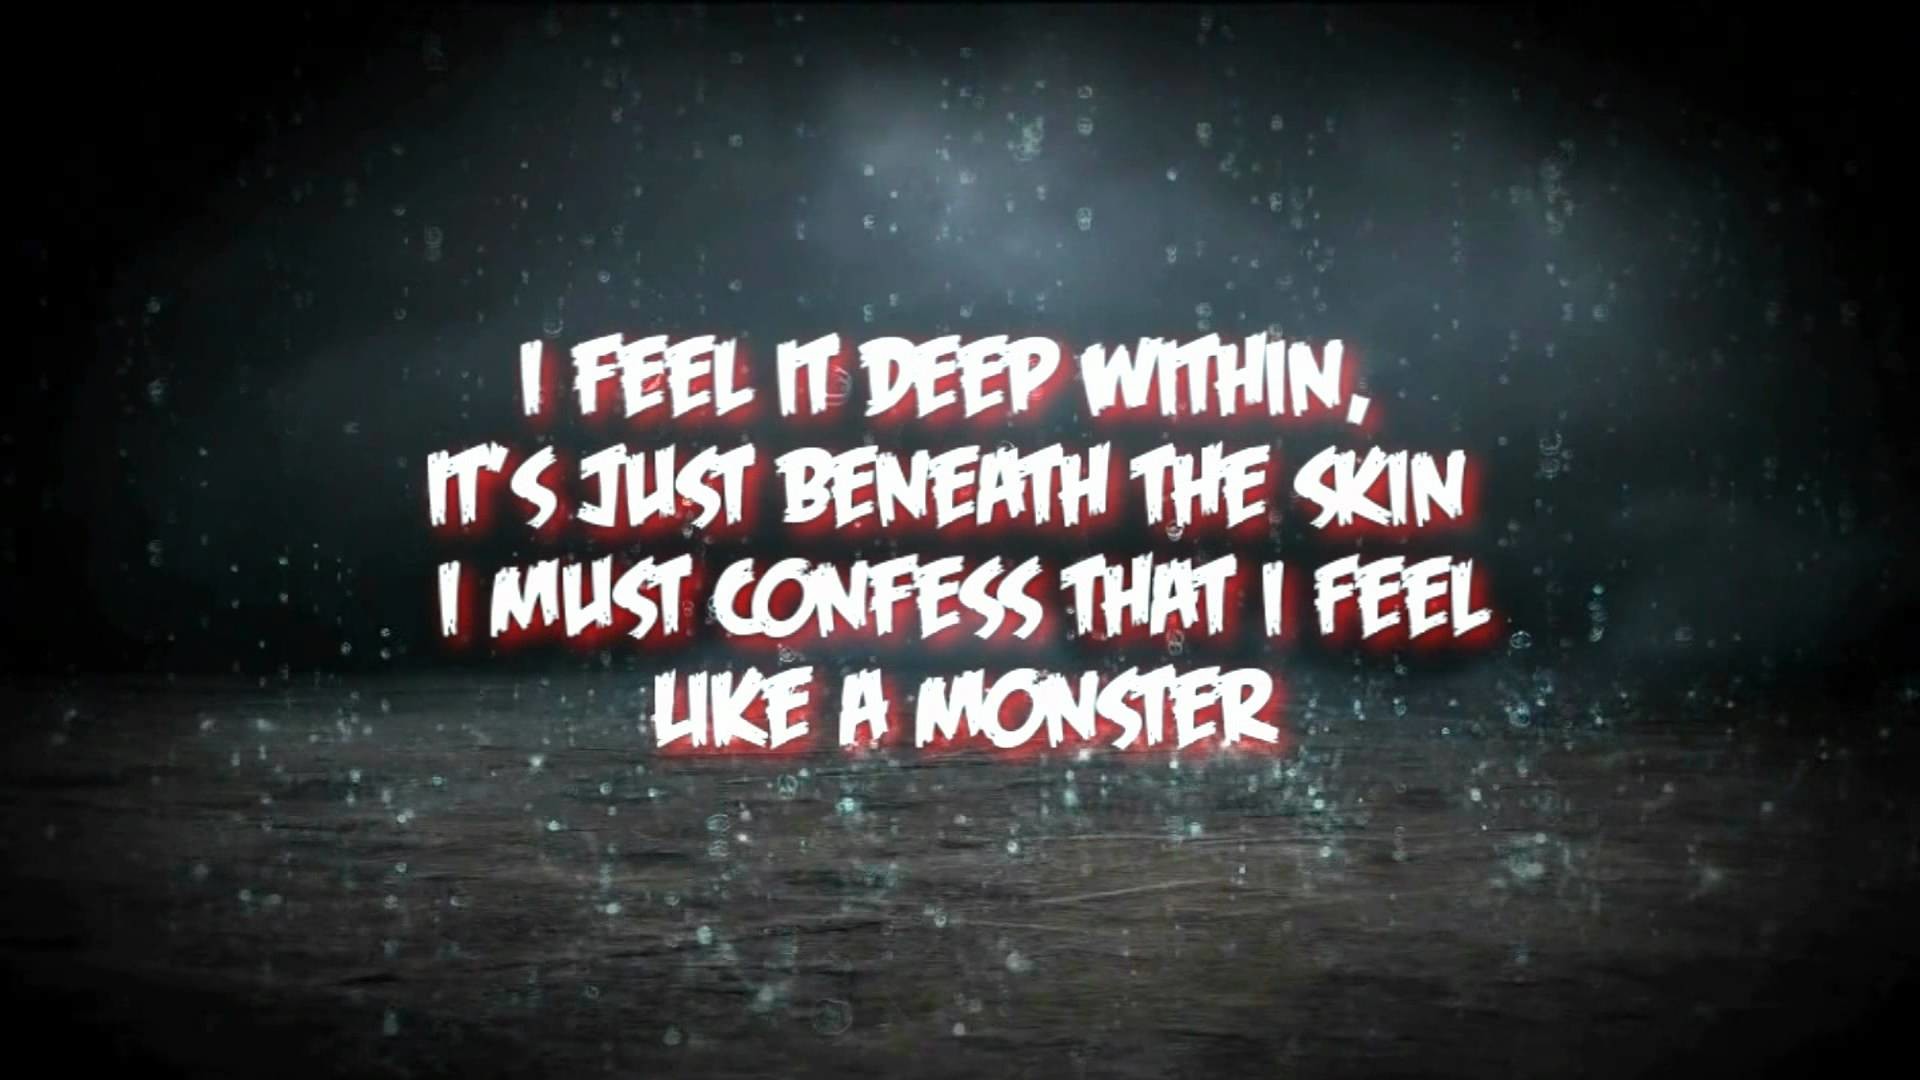 Like that baby monster текст. Monster Skillet Lyrics. Skillet Set it off текст. I feel it Deep within it's just beneath the Skin i must confess that i feel like a Monster. Feel like a Monster Lyrics.